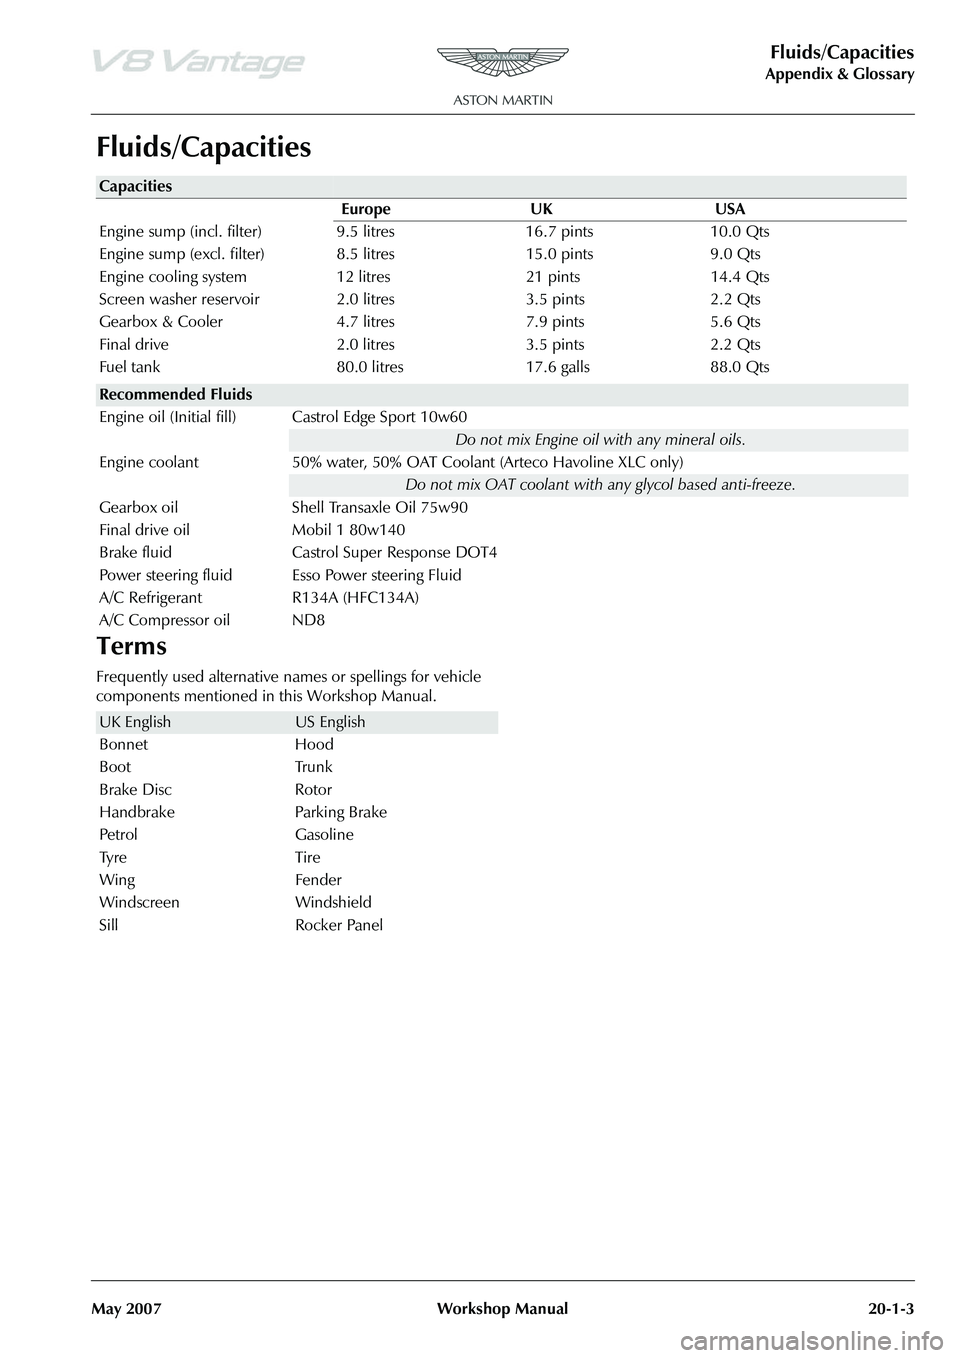 ASTON MARTIN V8 VANTAGE 2010 User Guide Fluids/Capacities
Appendix & Glossary
May 2007 Workshop Manual 20-1-3
Fluids/Capacities
Terms
Frequently used alternative names or spellings for vehicle 
components mentioned in this Workshop Manual.
